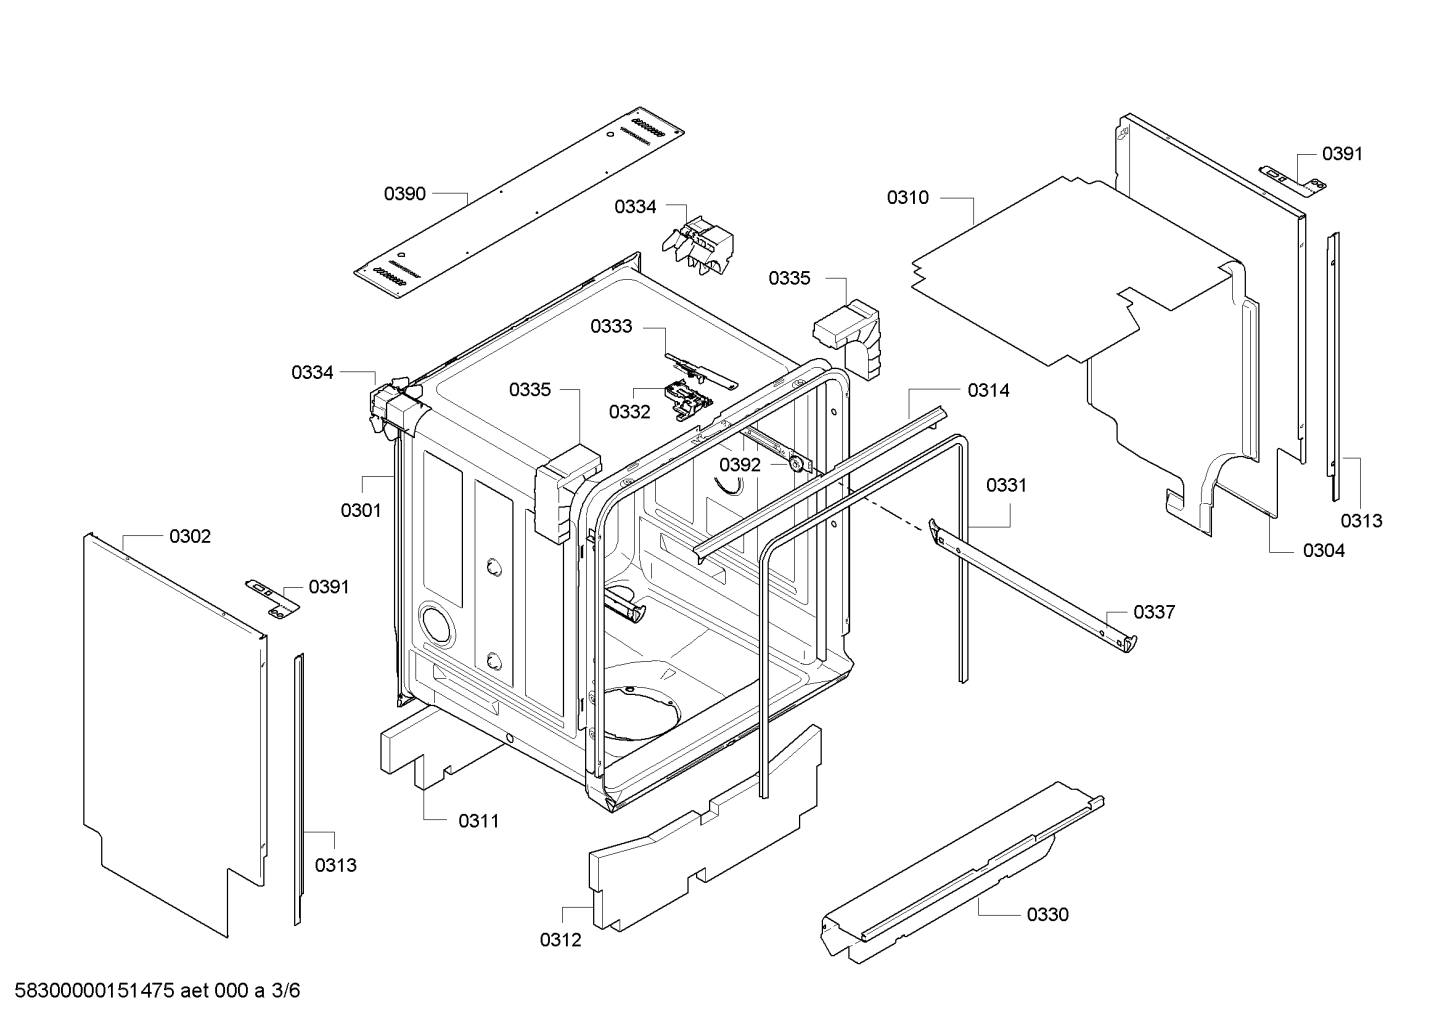 drawing_link_3_device_1587957